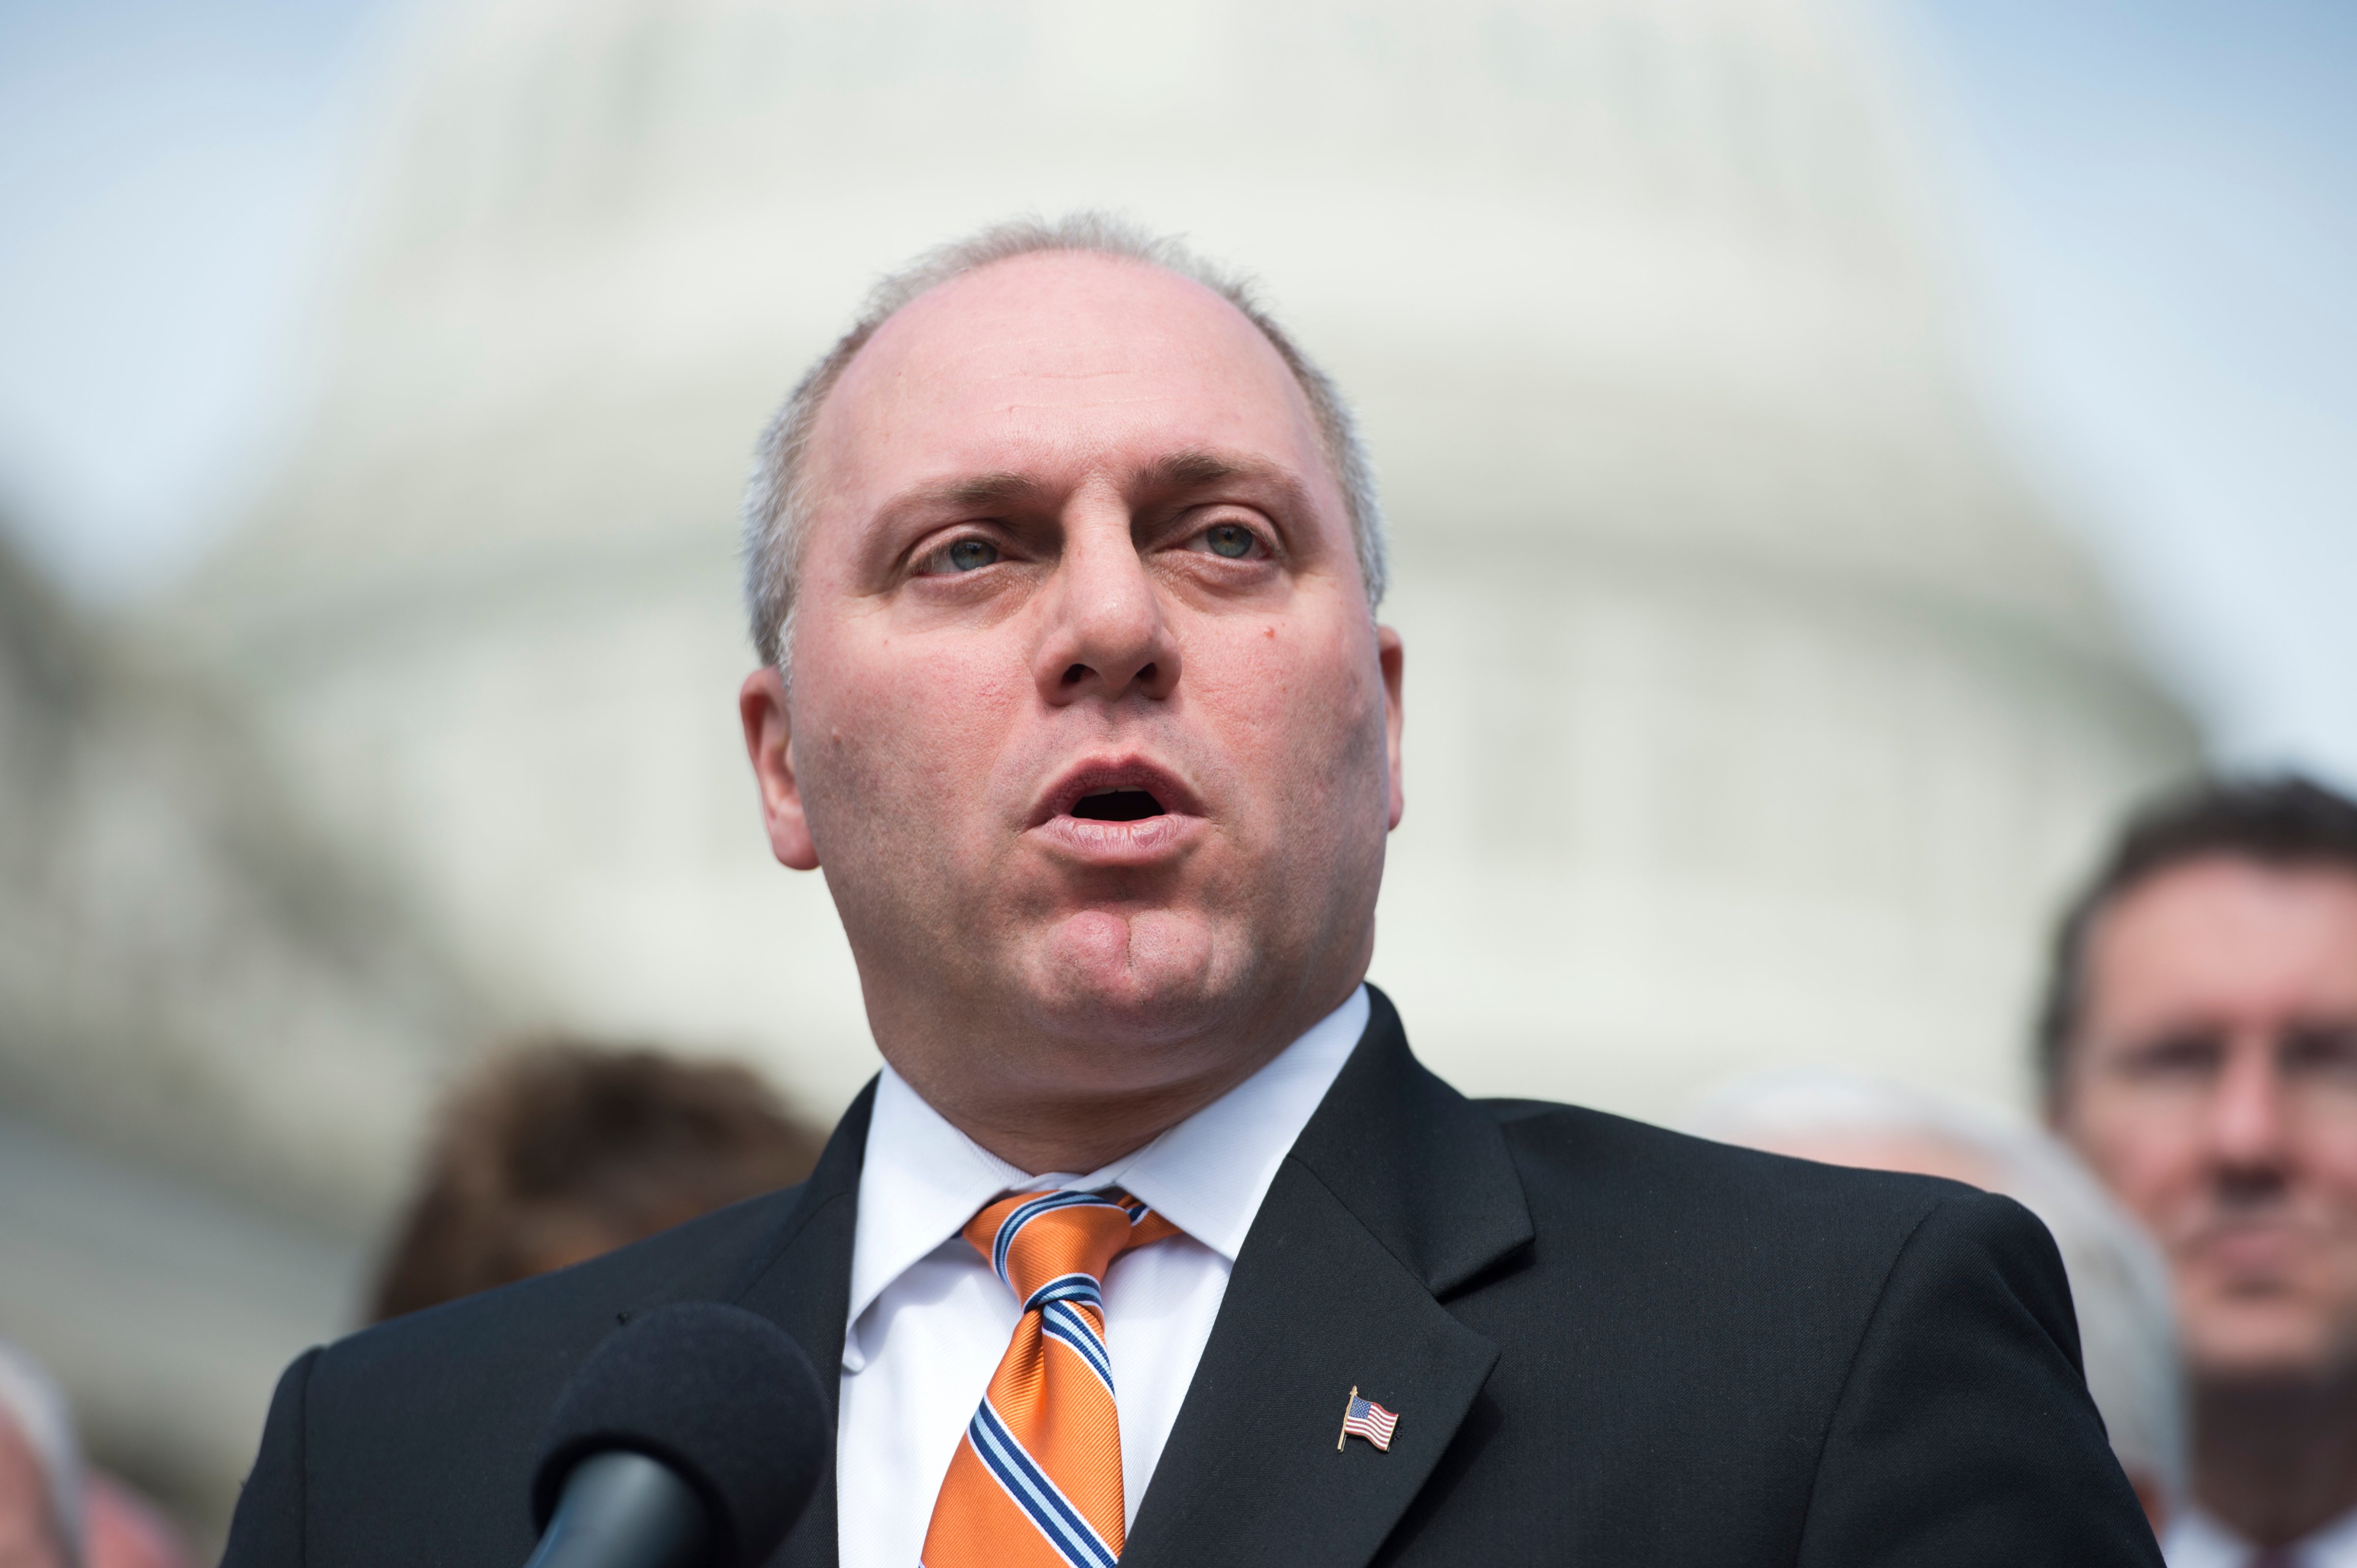 Rep. Steve Scalise, R-La., speaks at the House Triangle during the Coal Caucus' news conference on the EPA's recently proposed greenhouse gas standards for new power plants on Sept. 26, 2013 in Washington. (Bill Clark—CQ Roll Call/Getty Images)